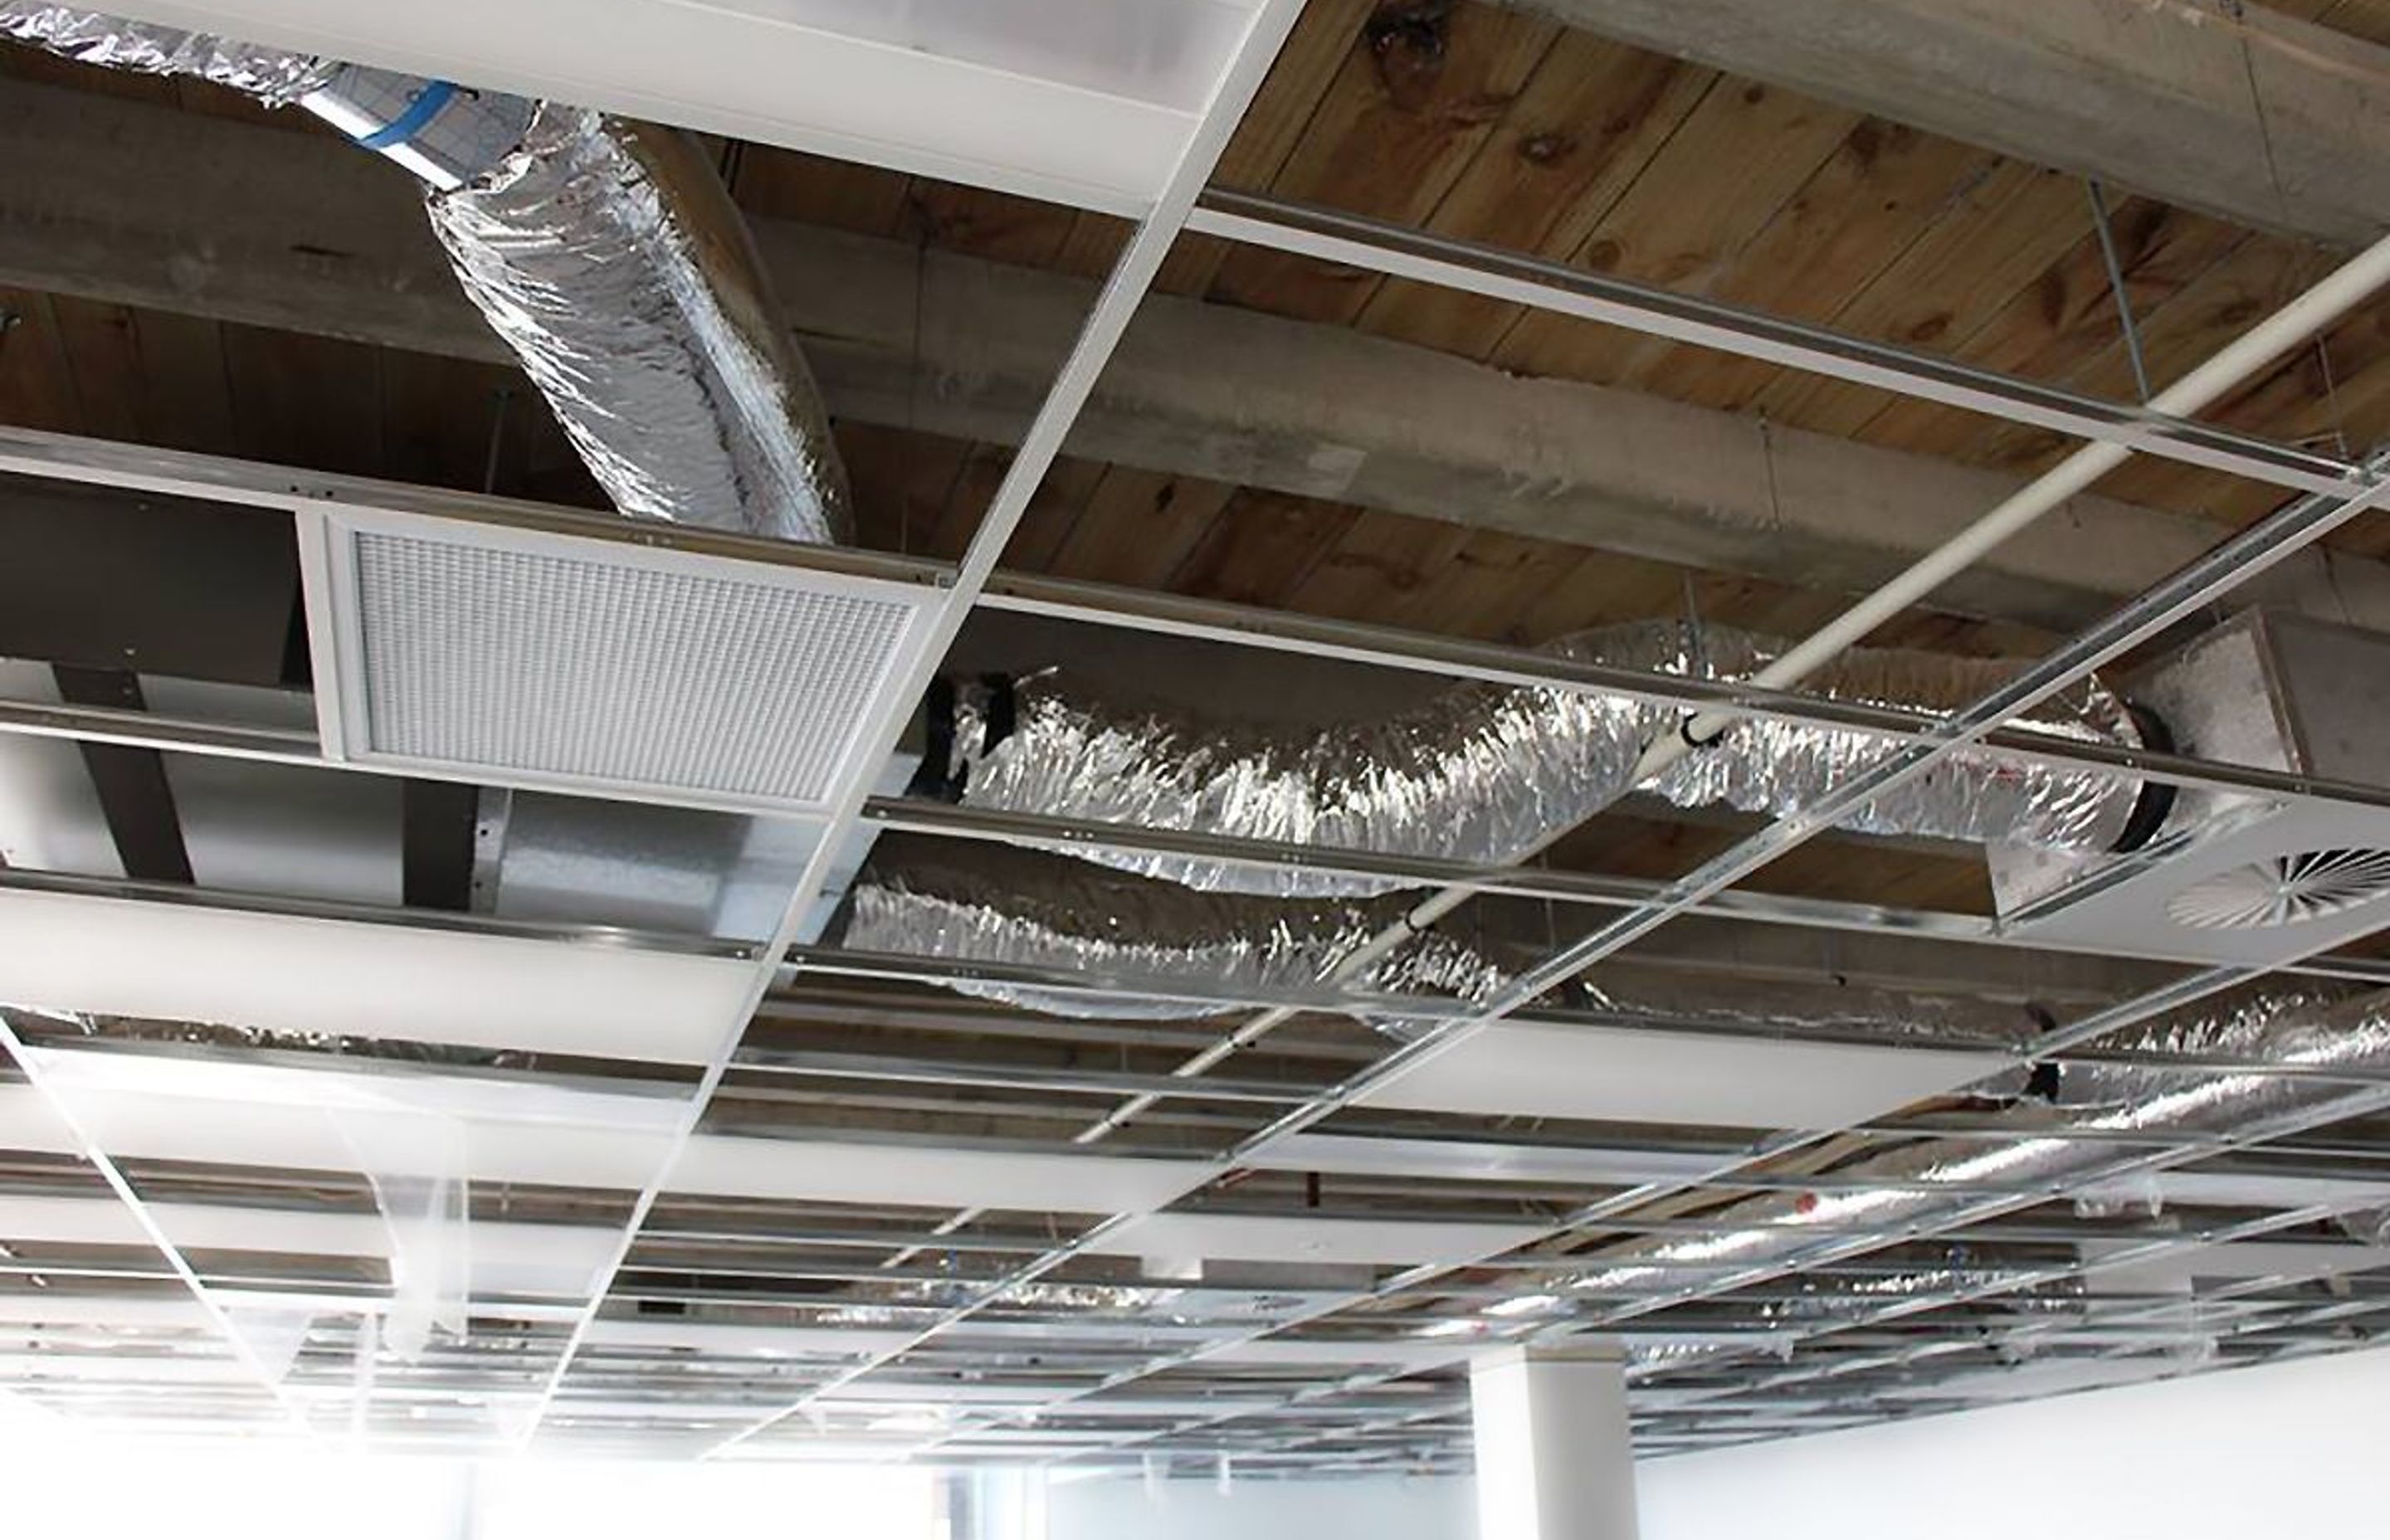 CBI Grid and the Seismic Design of Suspended Ceilings